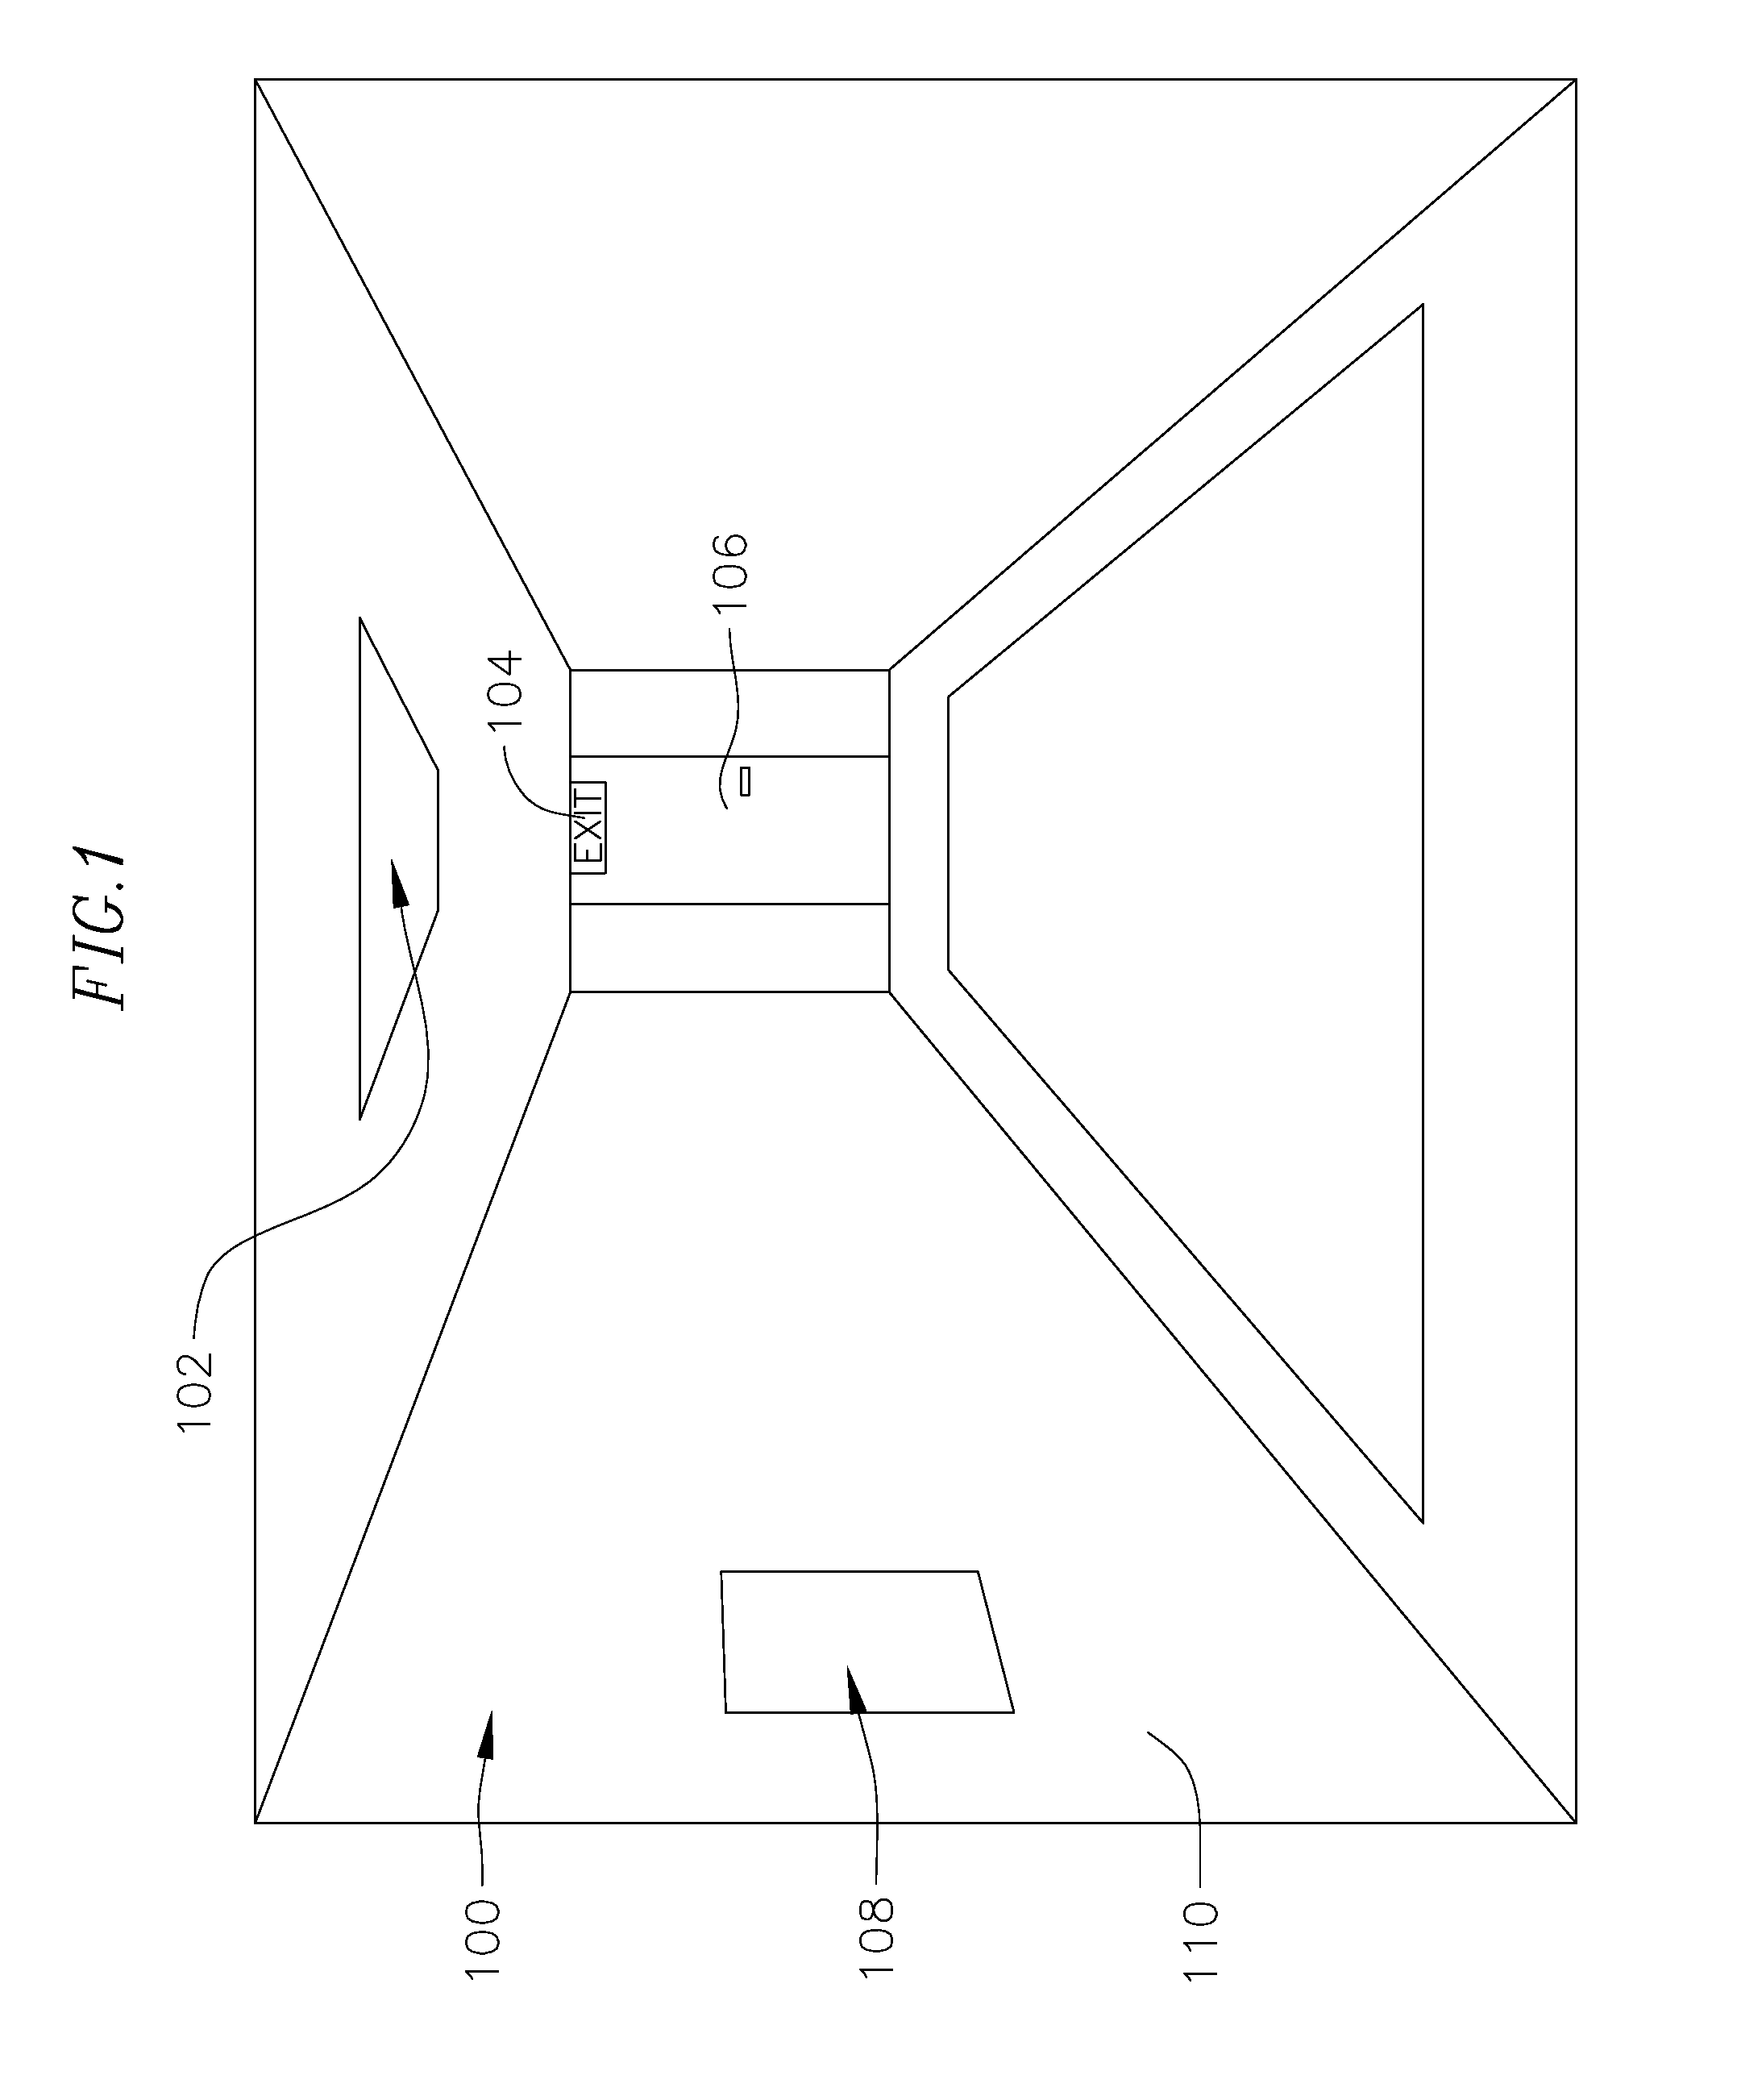 Supplemental, backup or emergency lighting systems and methods